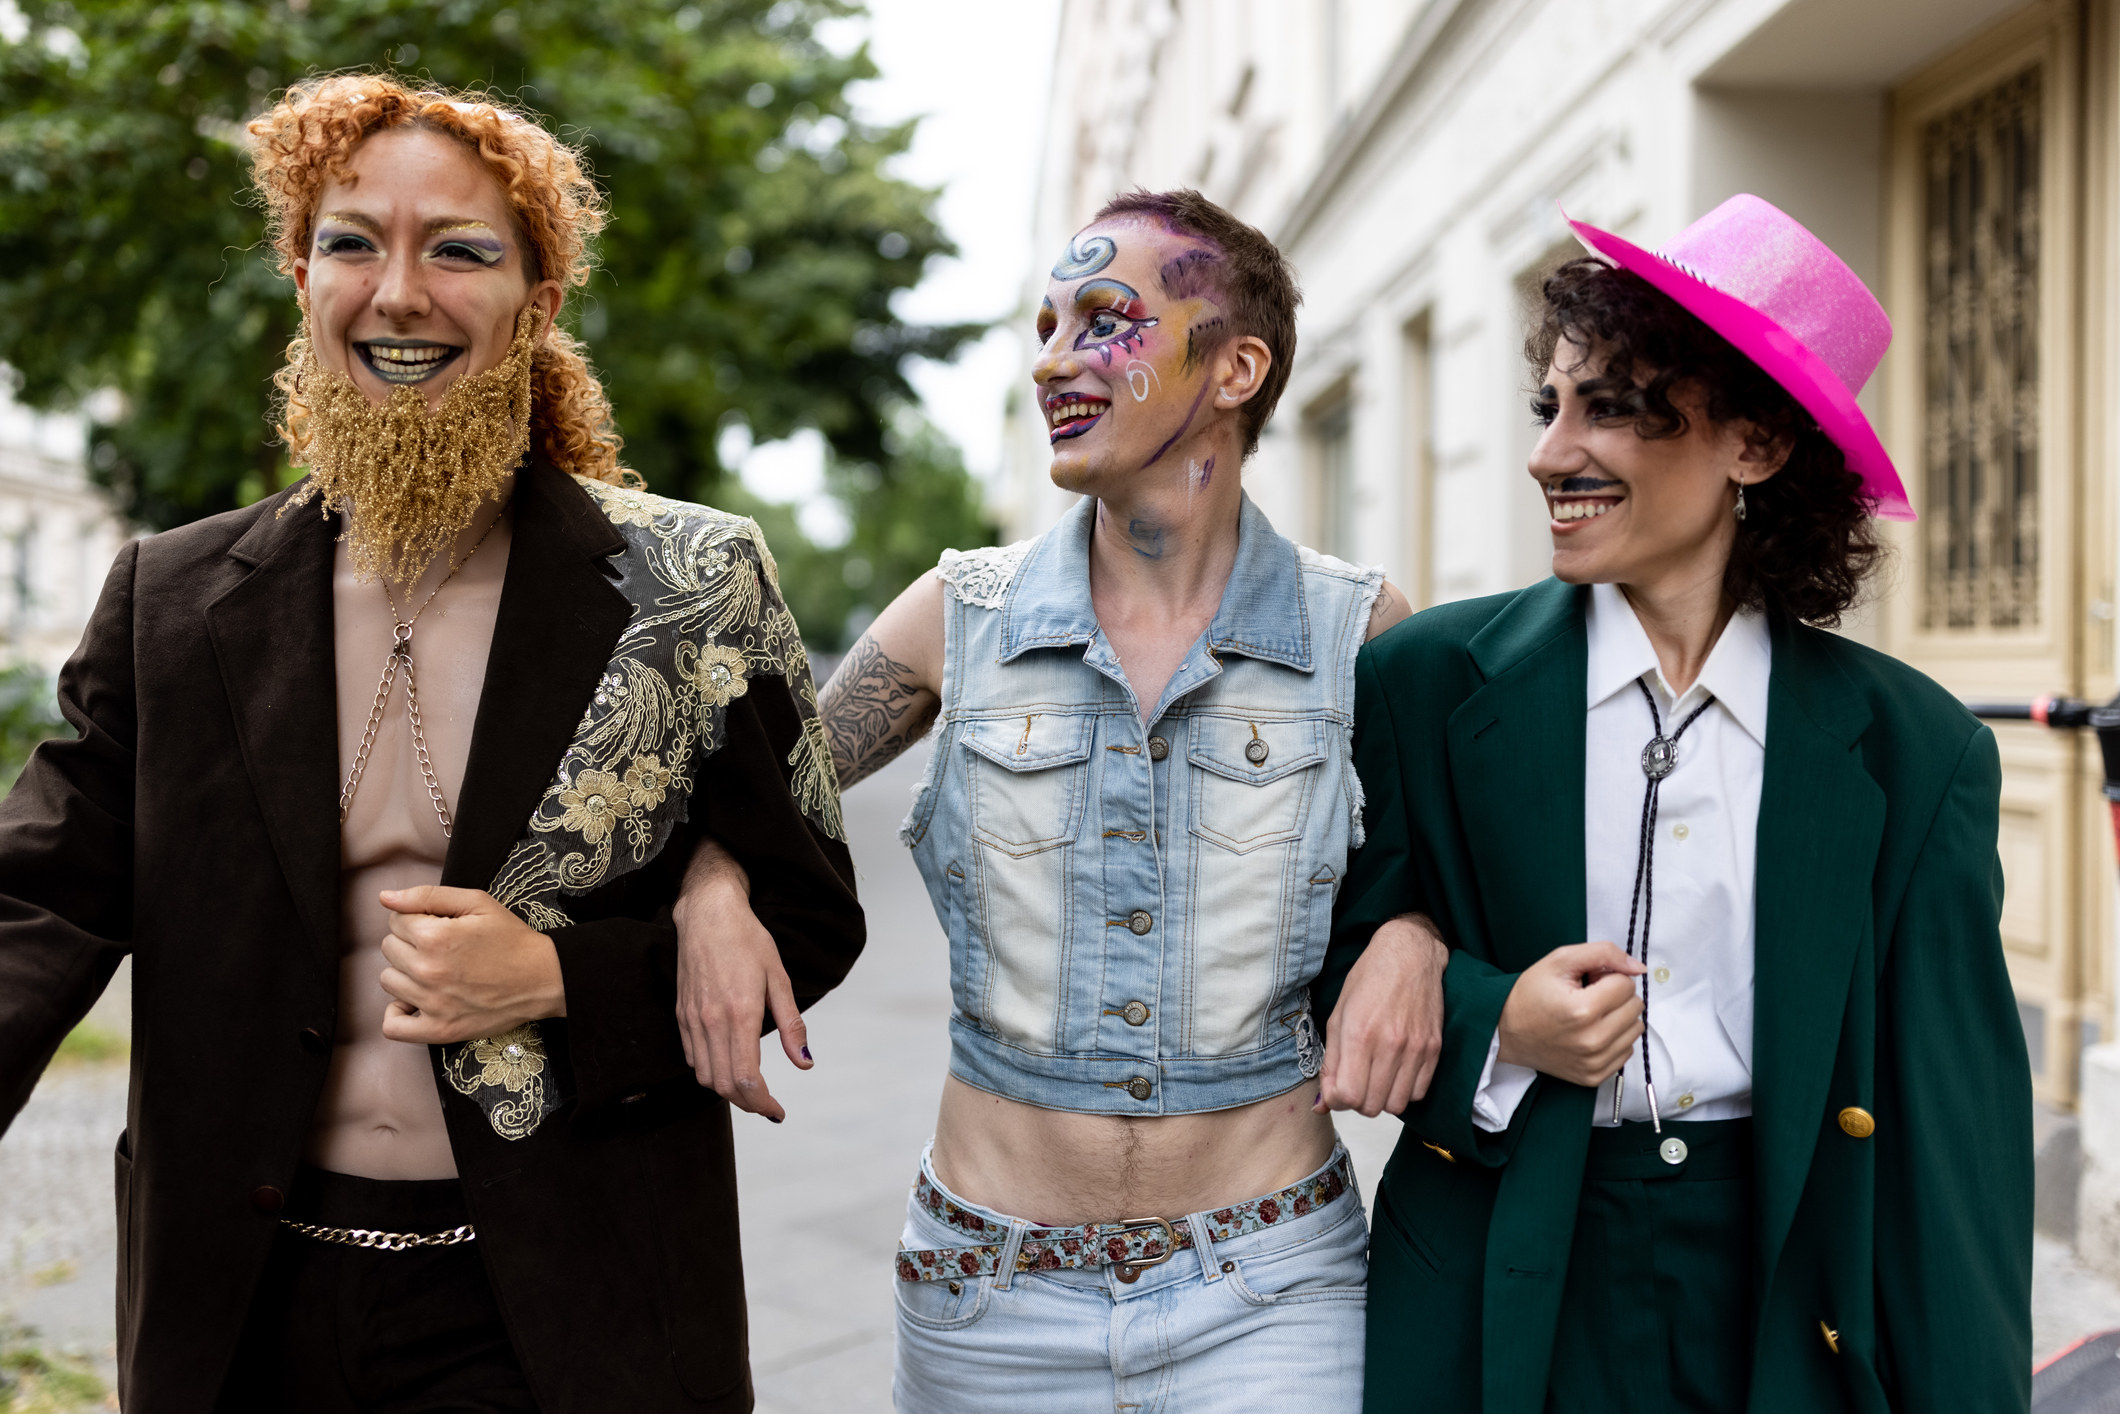 Group of three genderqueer friends walking outdoors in drag attire holding hands